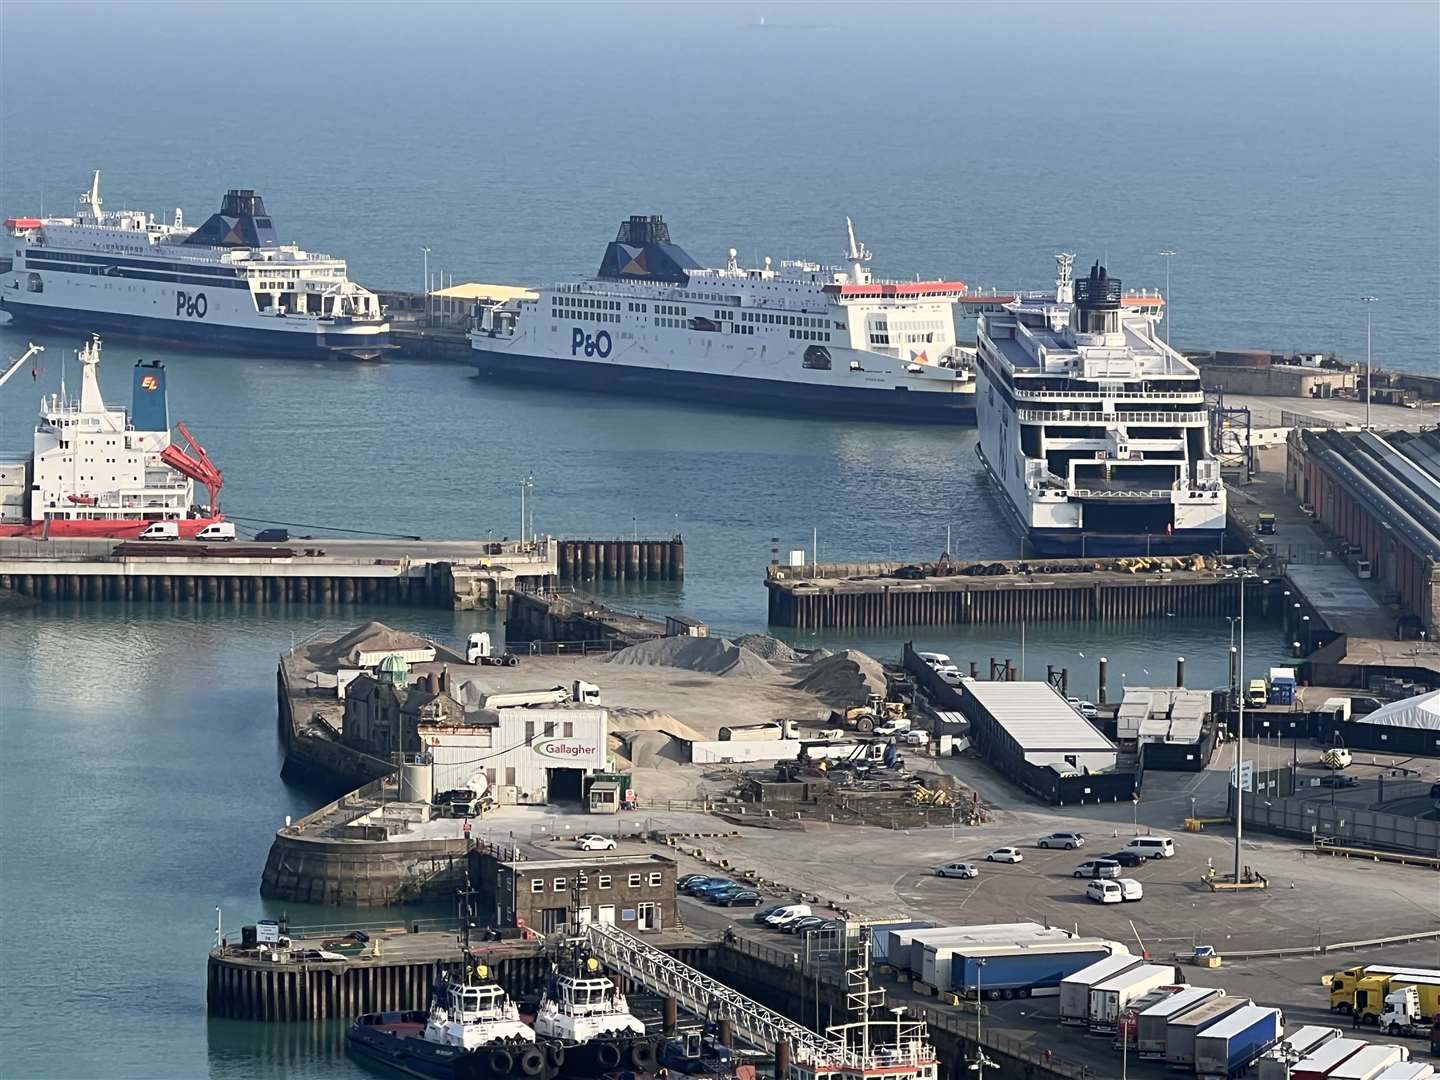 There is a waiting time of up to one hour on ferries in Dover. Picture: Barry Goodwin